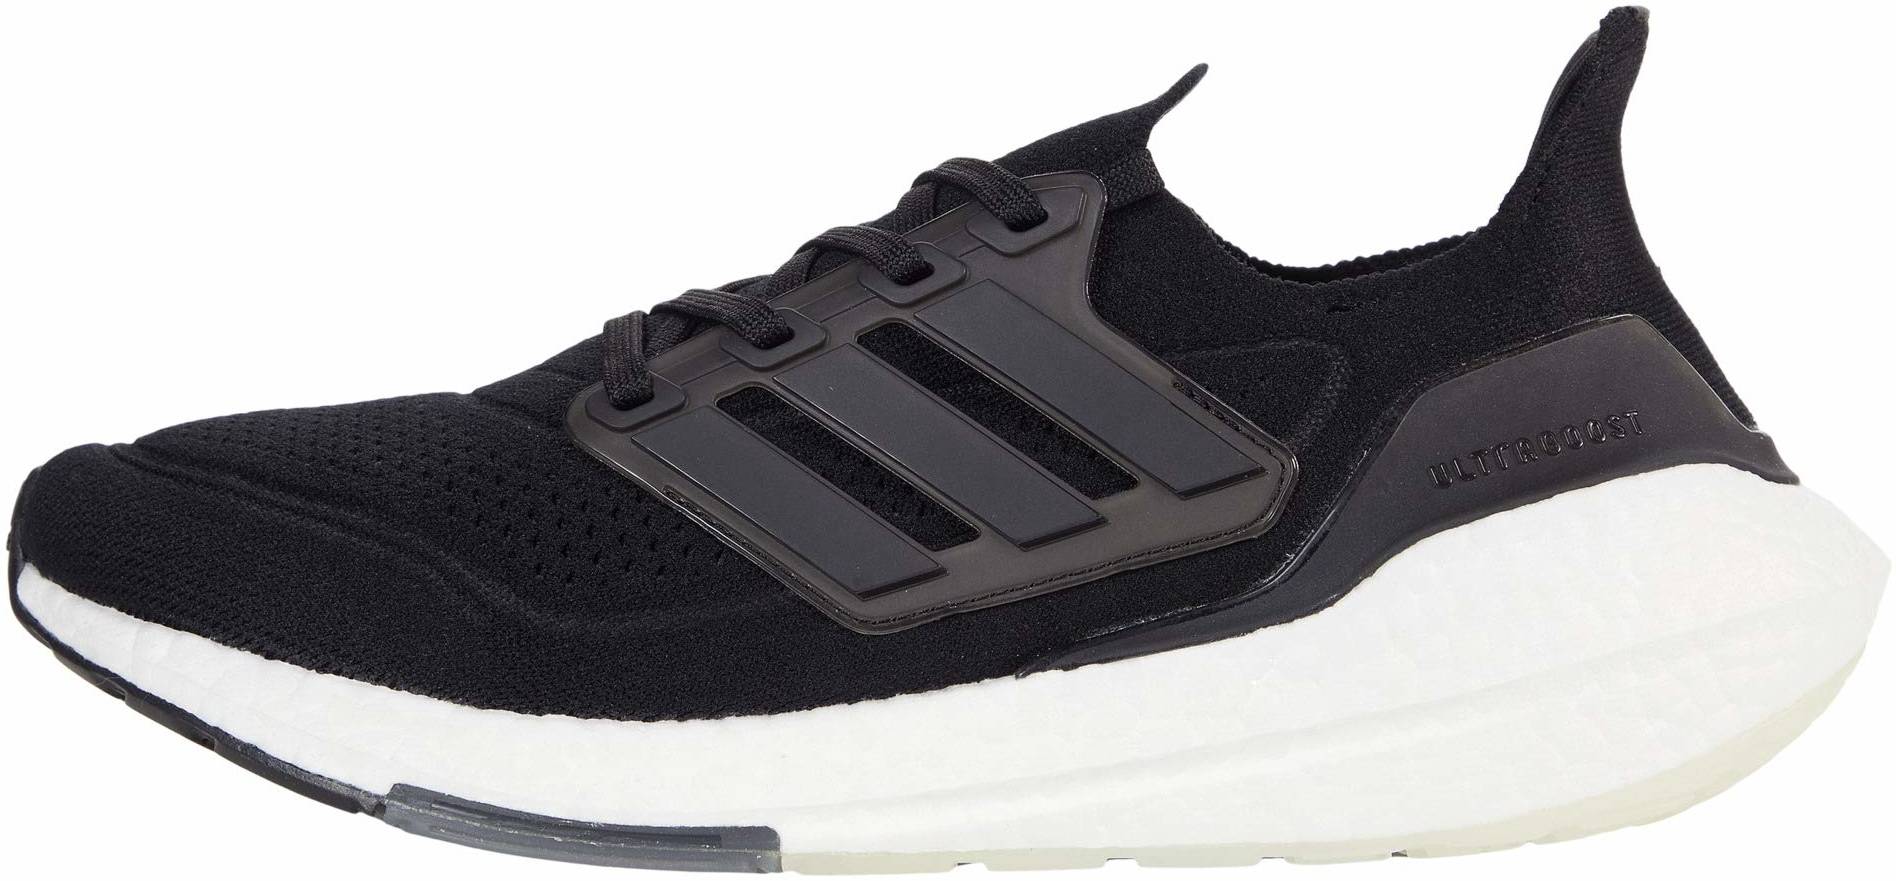 Adidas Ultraboost 21 - Lab Review 2021 - From $68 | RunRepeat